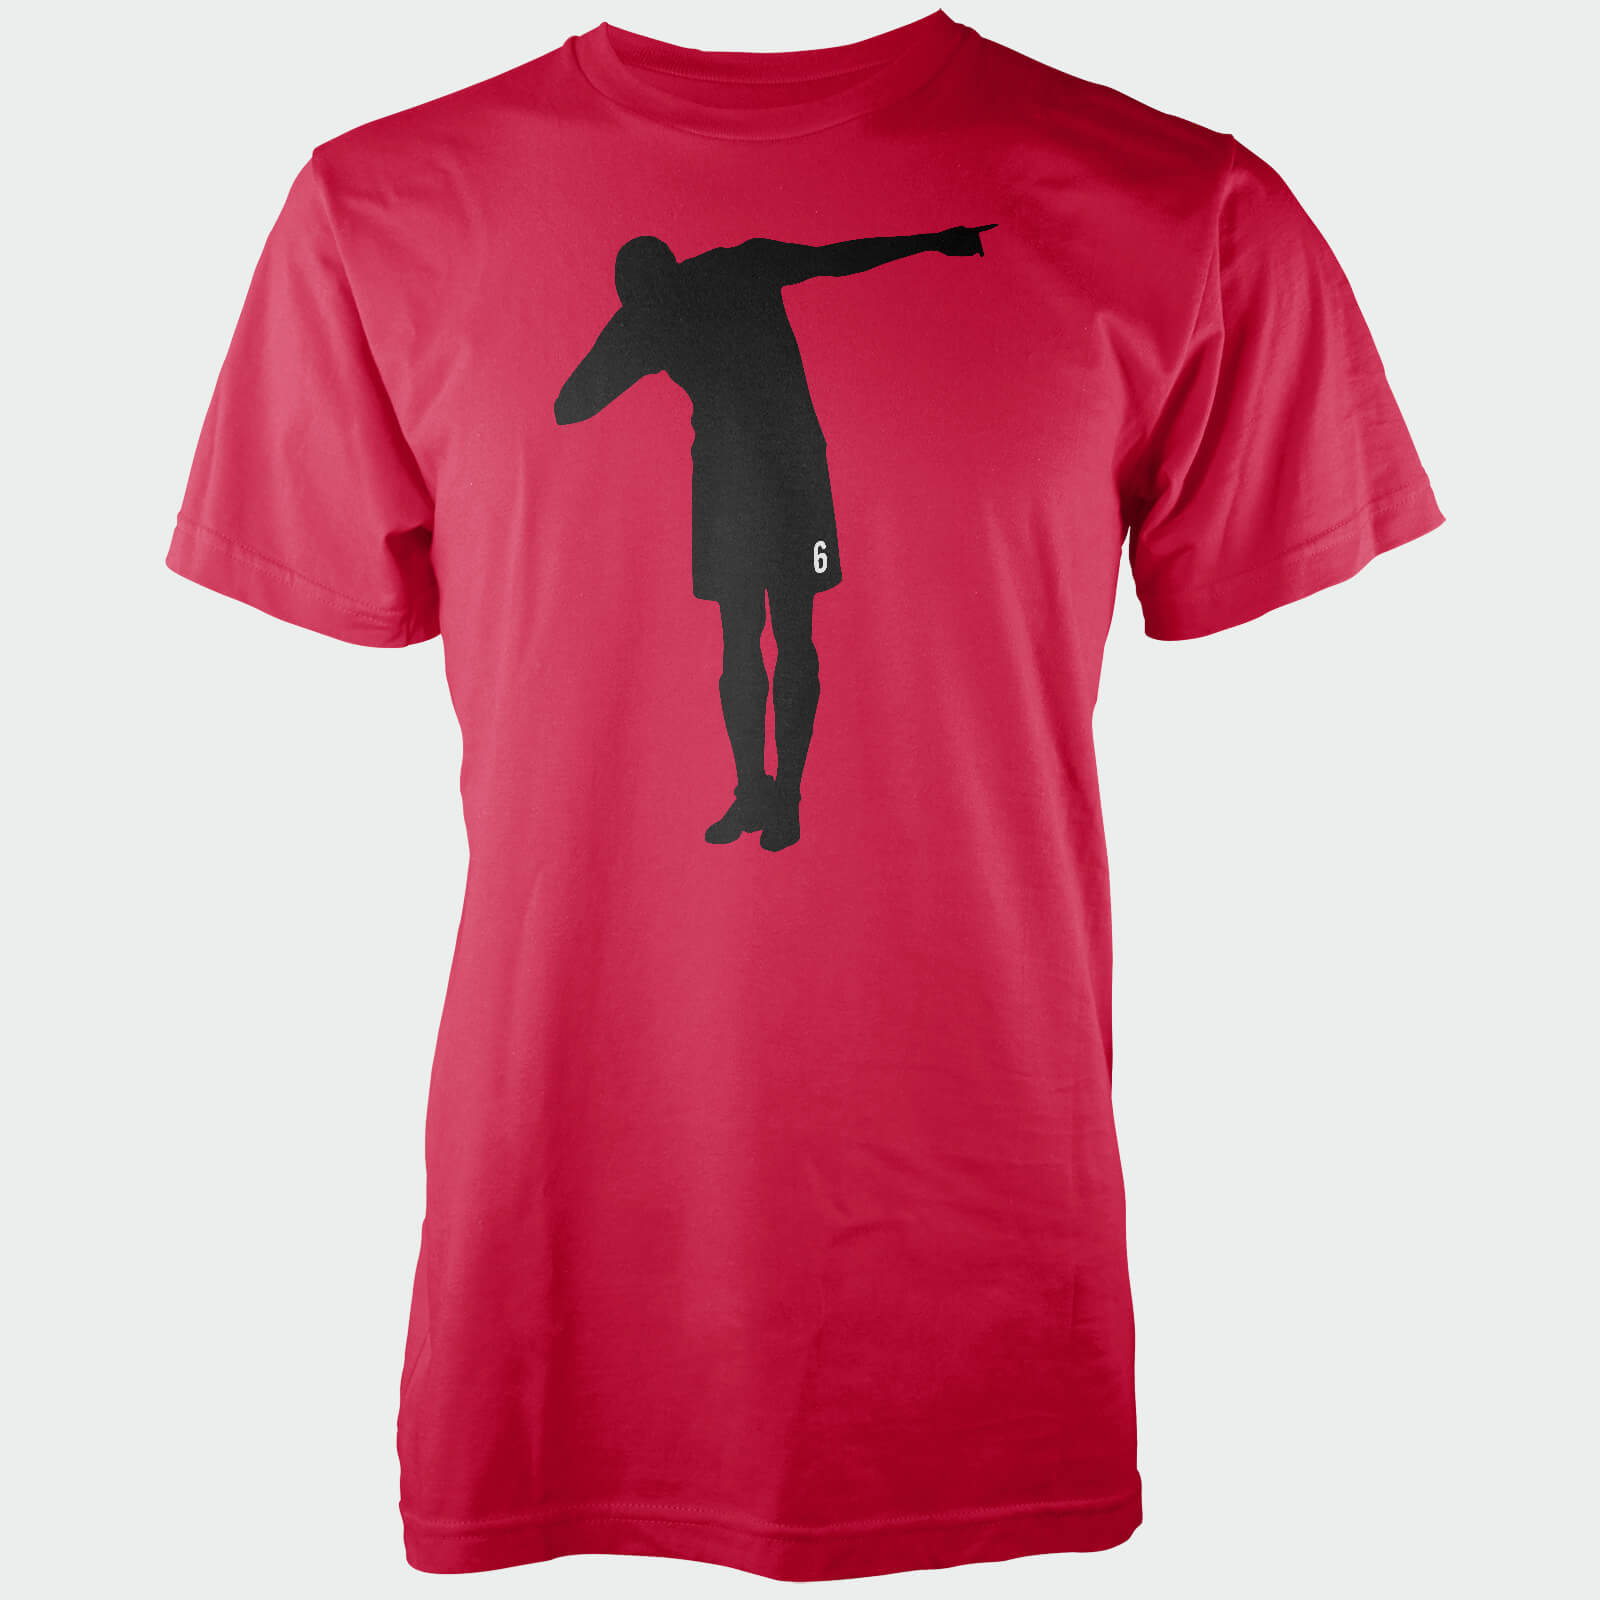 Dab On That Men's Red T-Shirt - S - Red